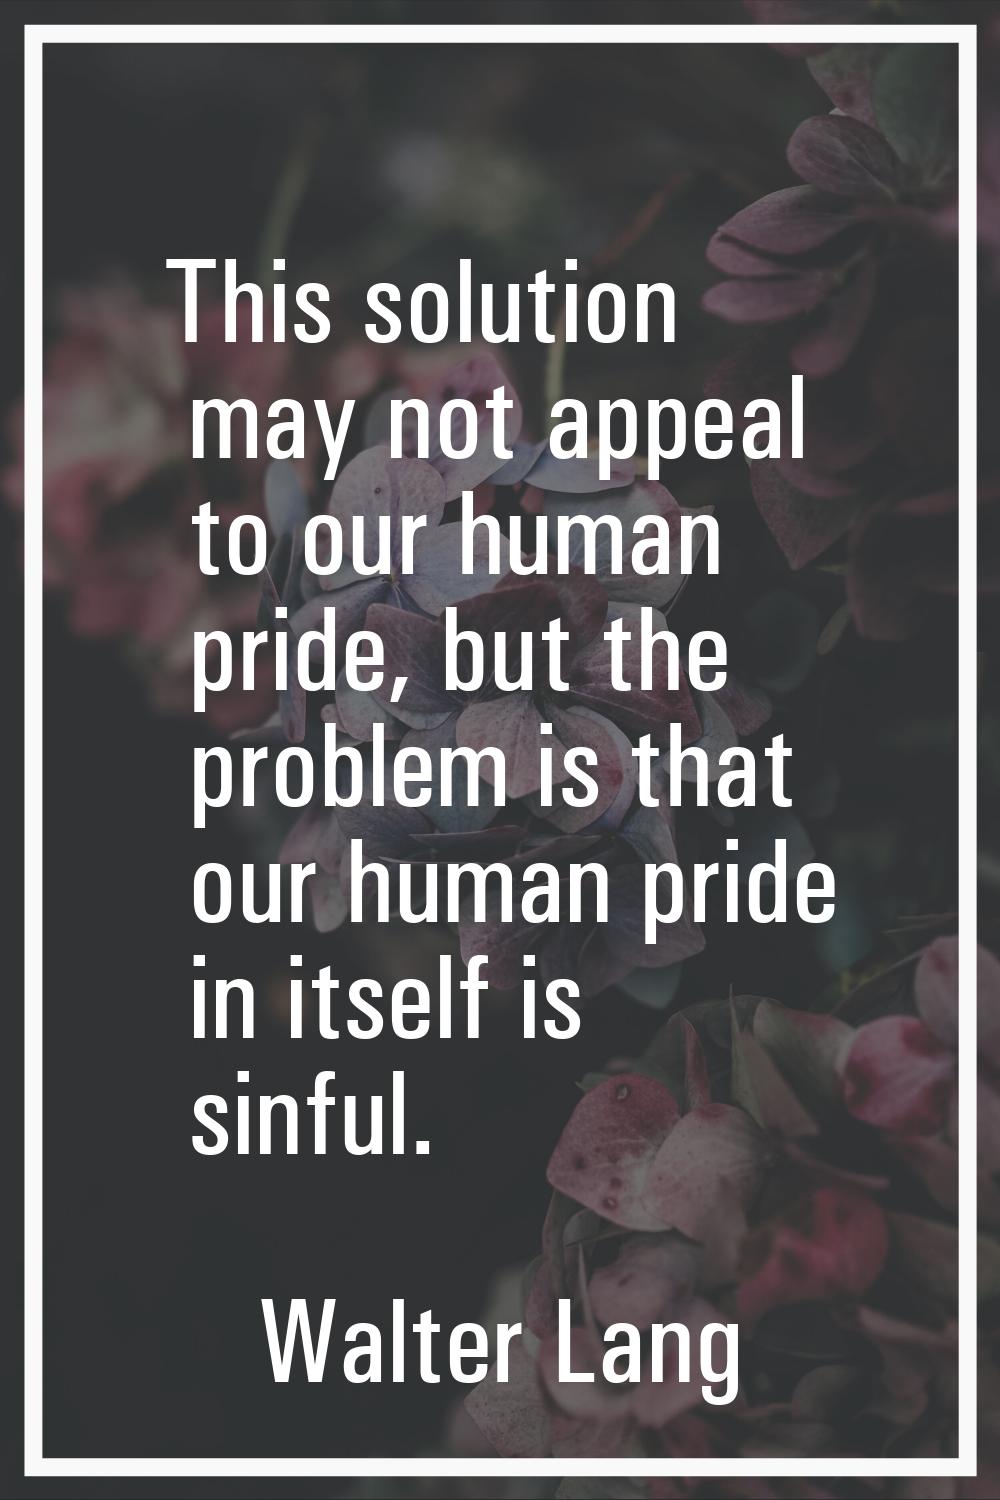 This solution may not appeal to our human pride, but the problem is that our human pride in itself 